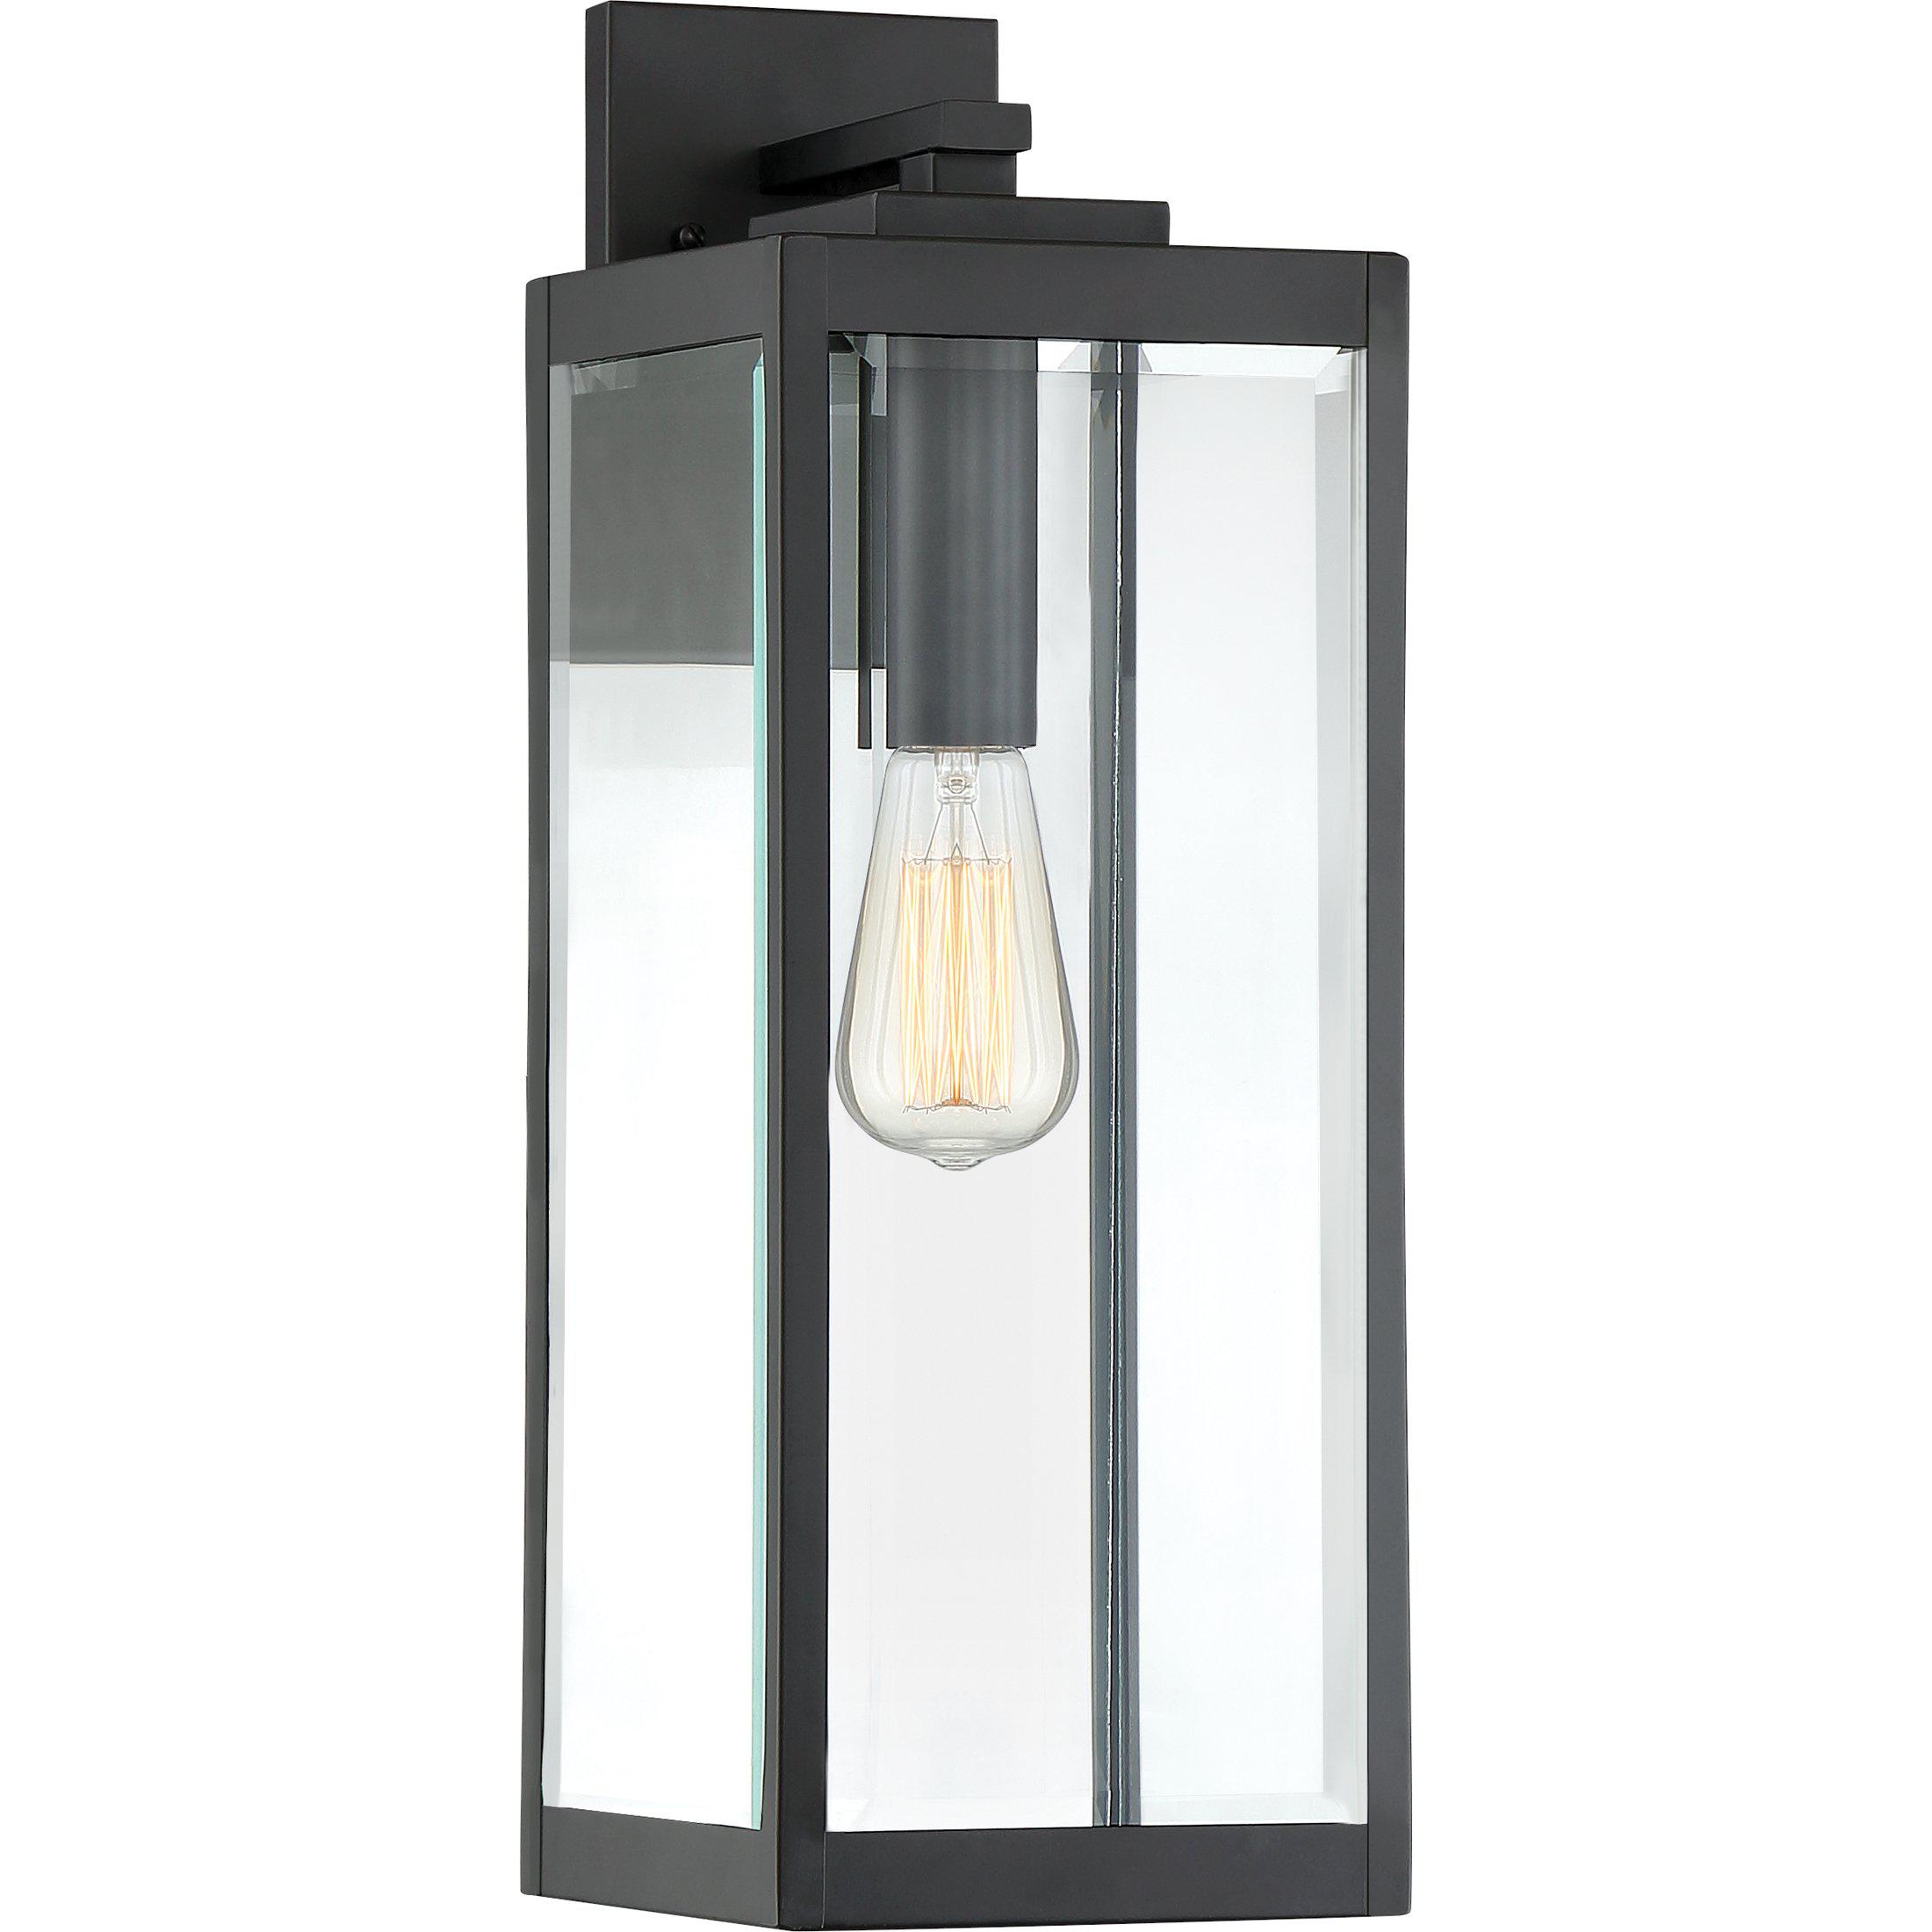 Quoizel Westover Outdoor Lantern, Large | Overstock Outdoor l Wall Quoizel Inc Earth Black  